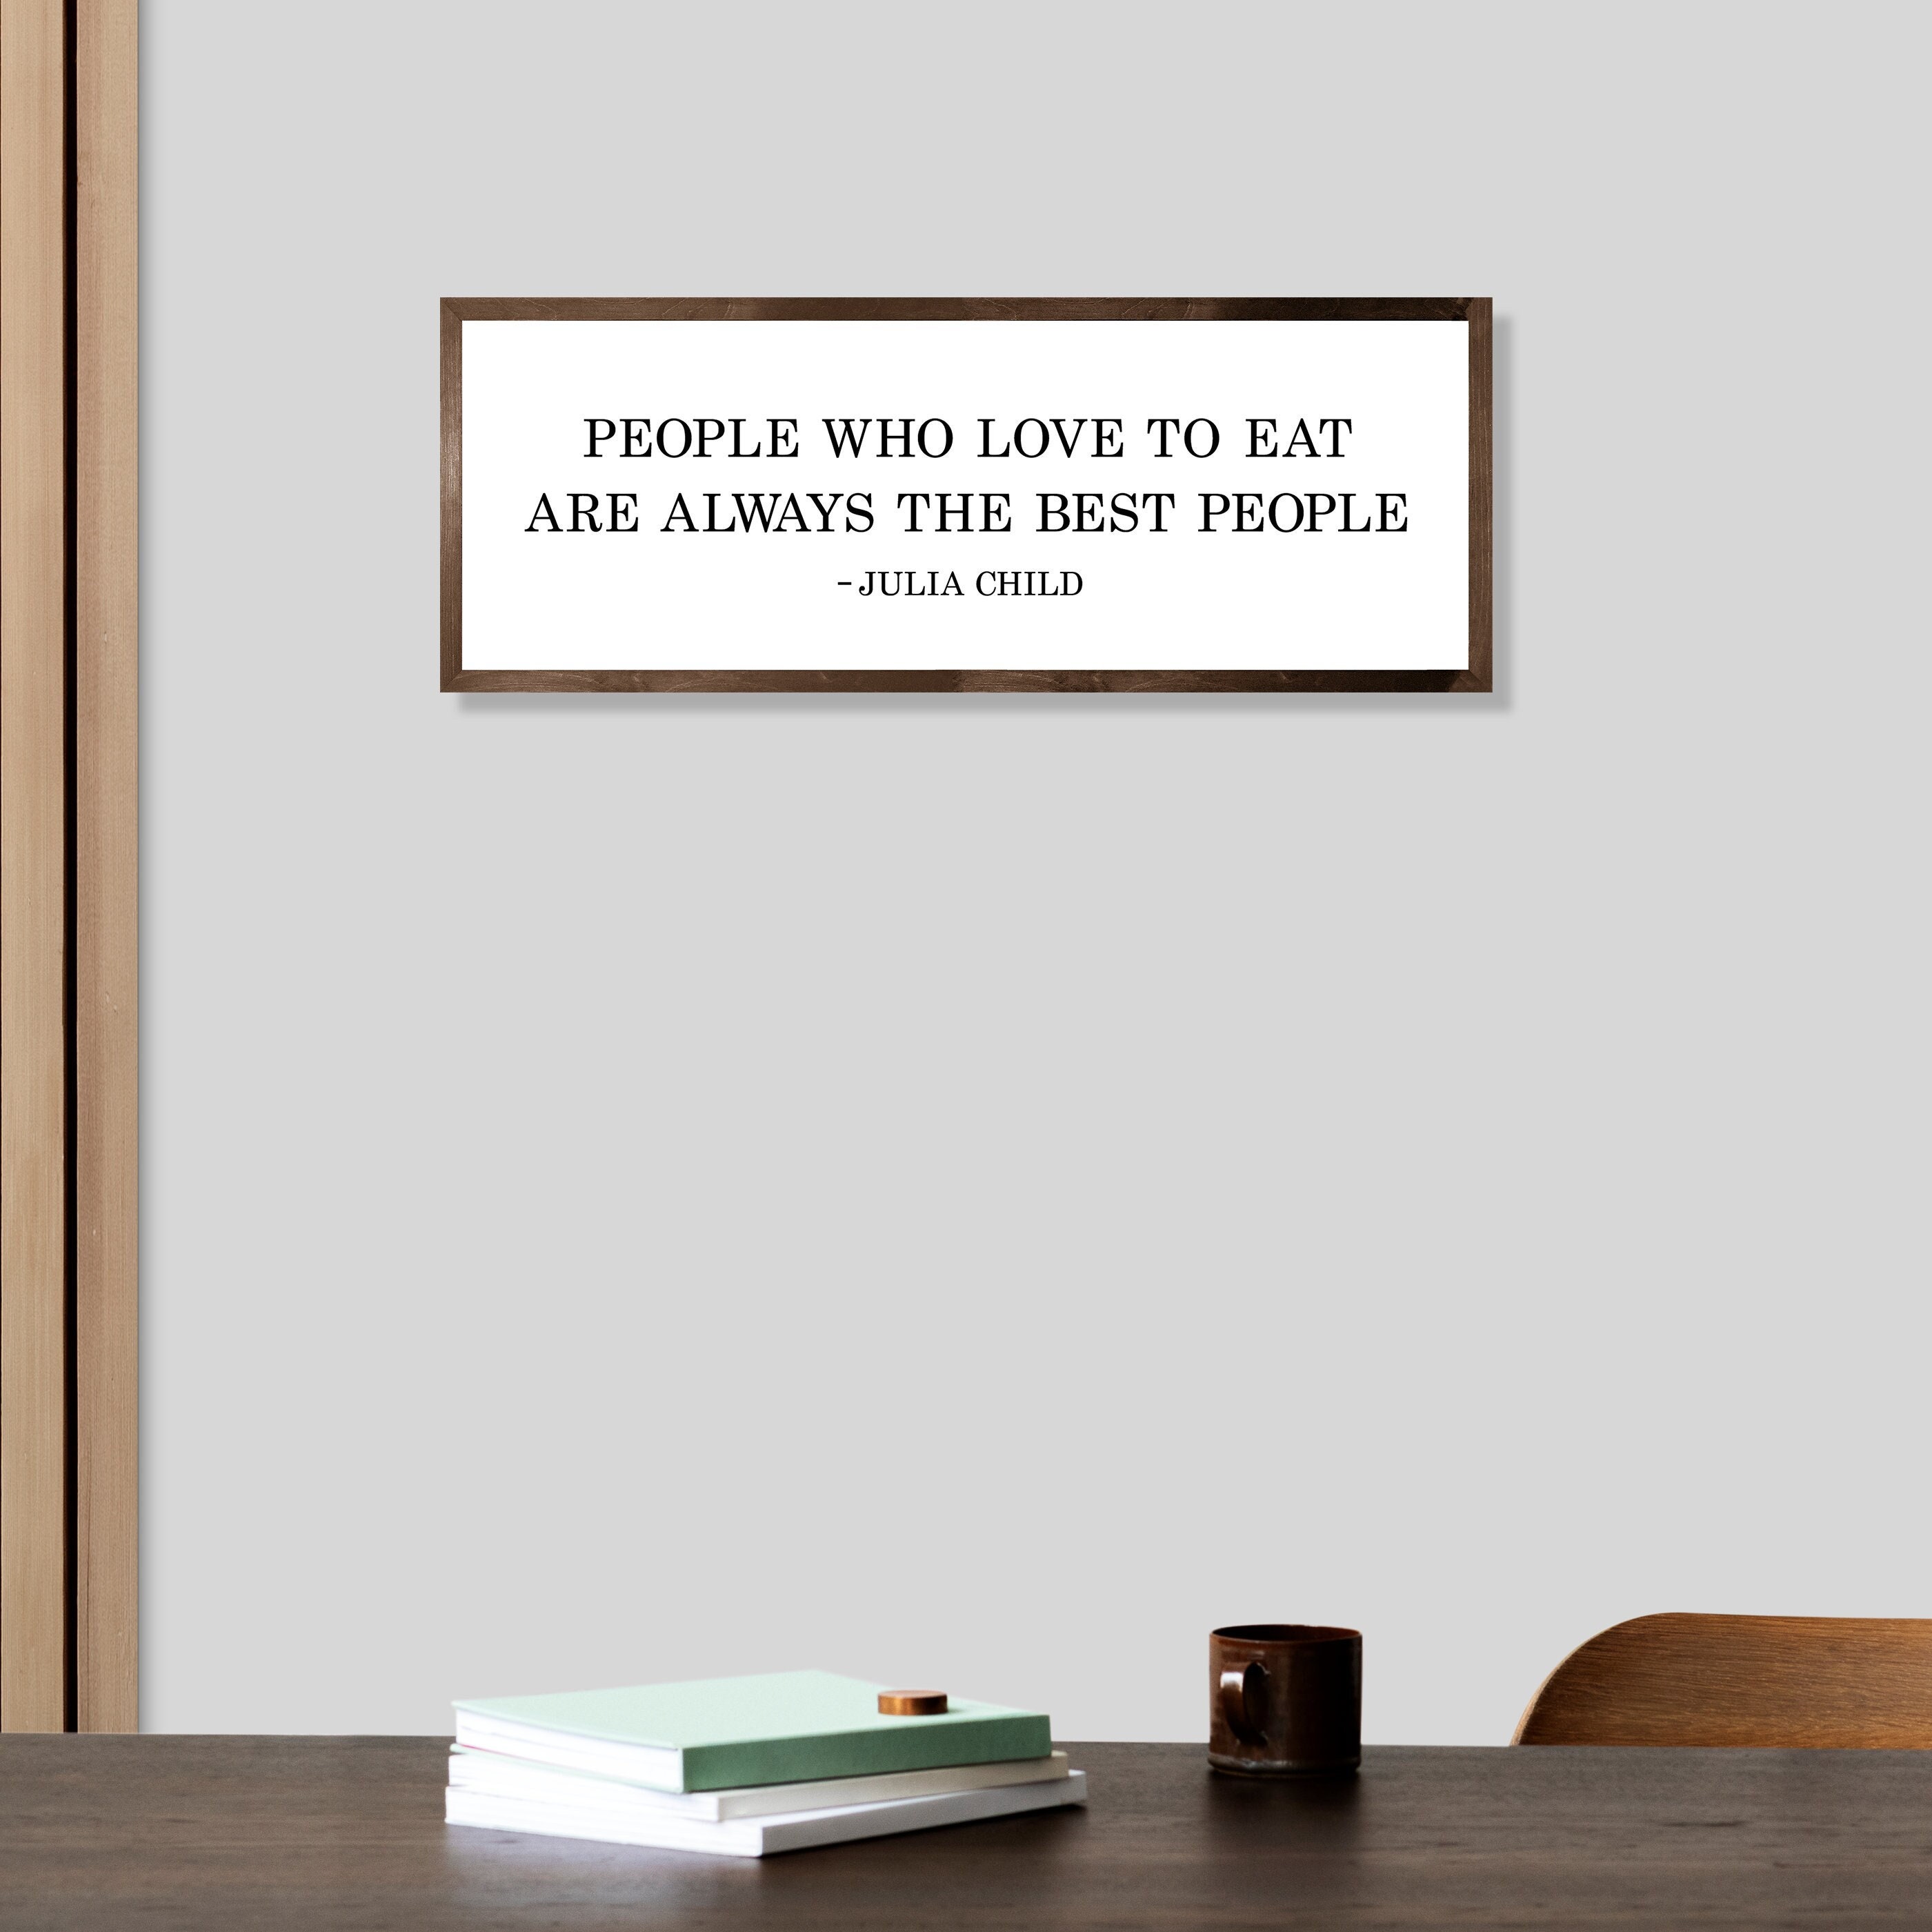 decor-wall for sign-julia who decor-kitchen eat the love sign are People always people kitchen room sign to child best quote-dining wall